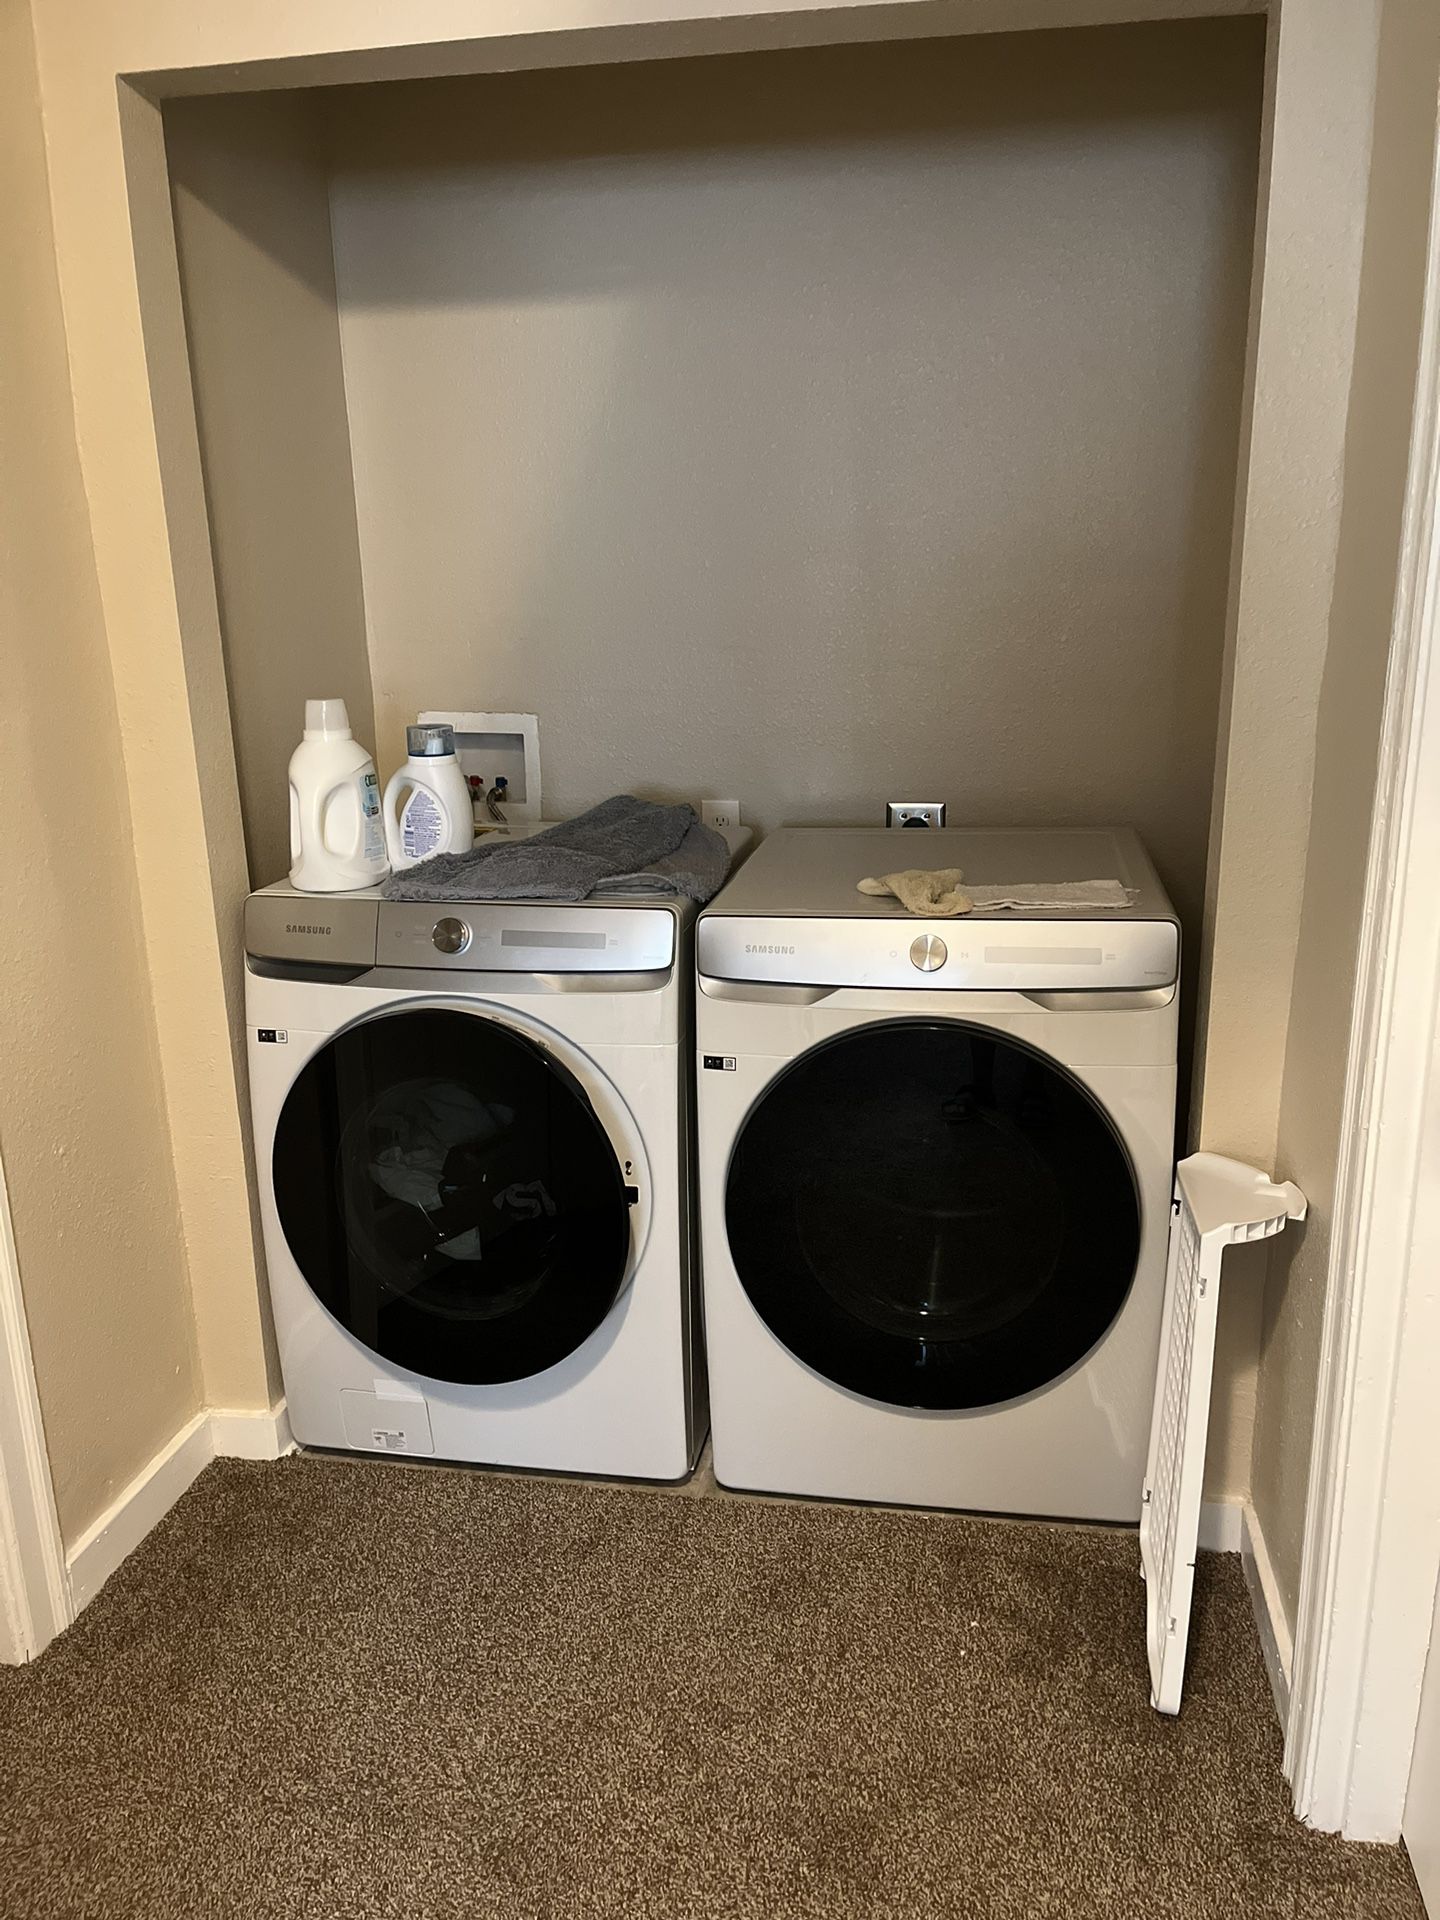 SMART WASHER AND DRYER